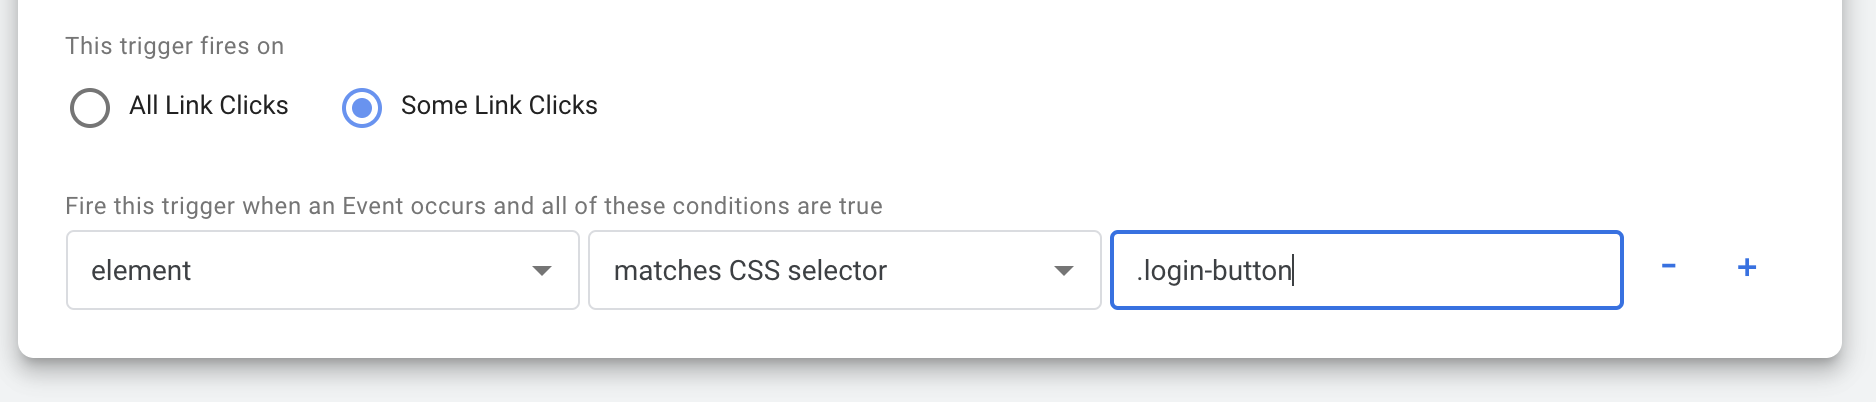 Setting up a GTM trigger with a CSS selector